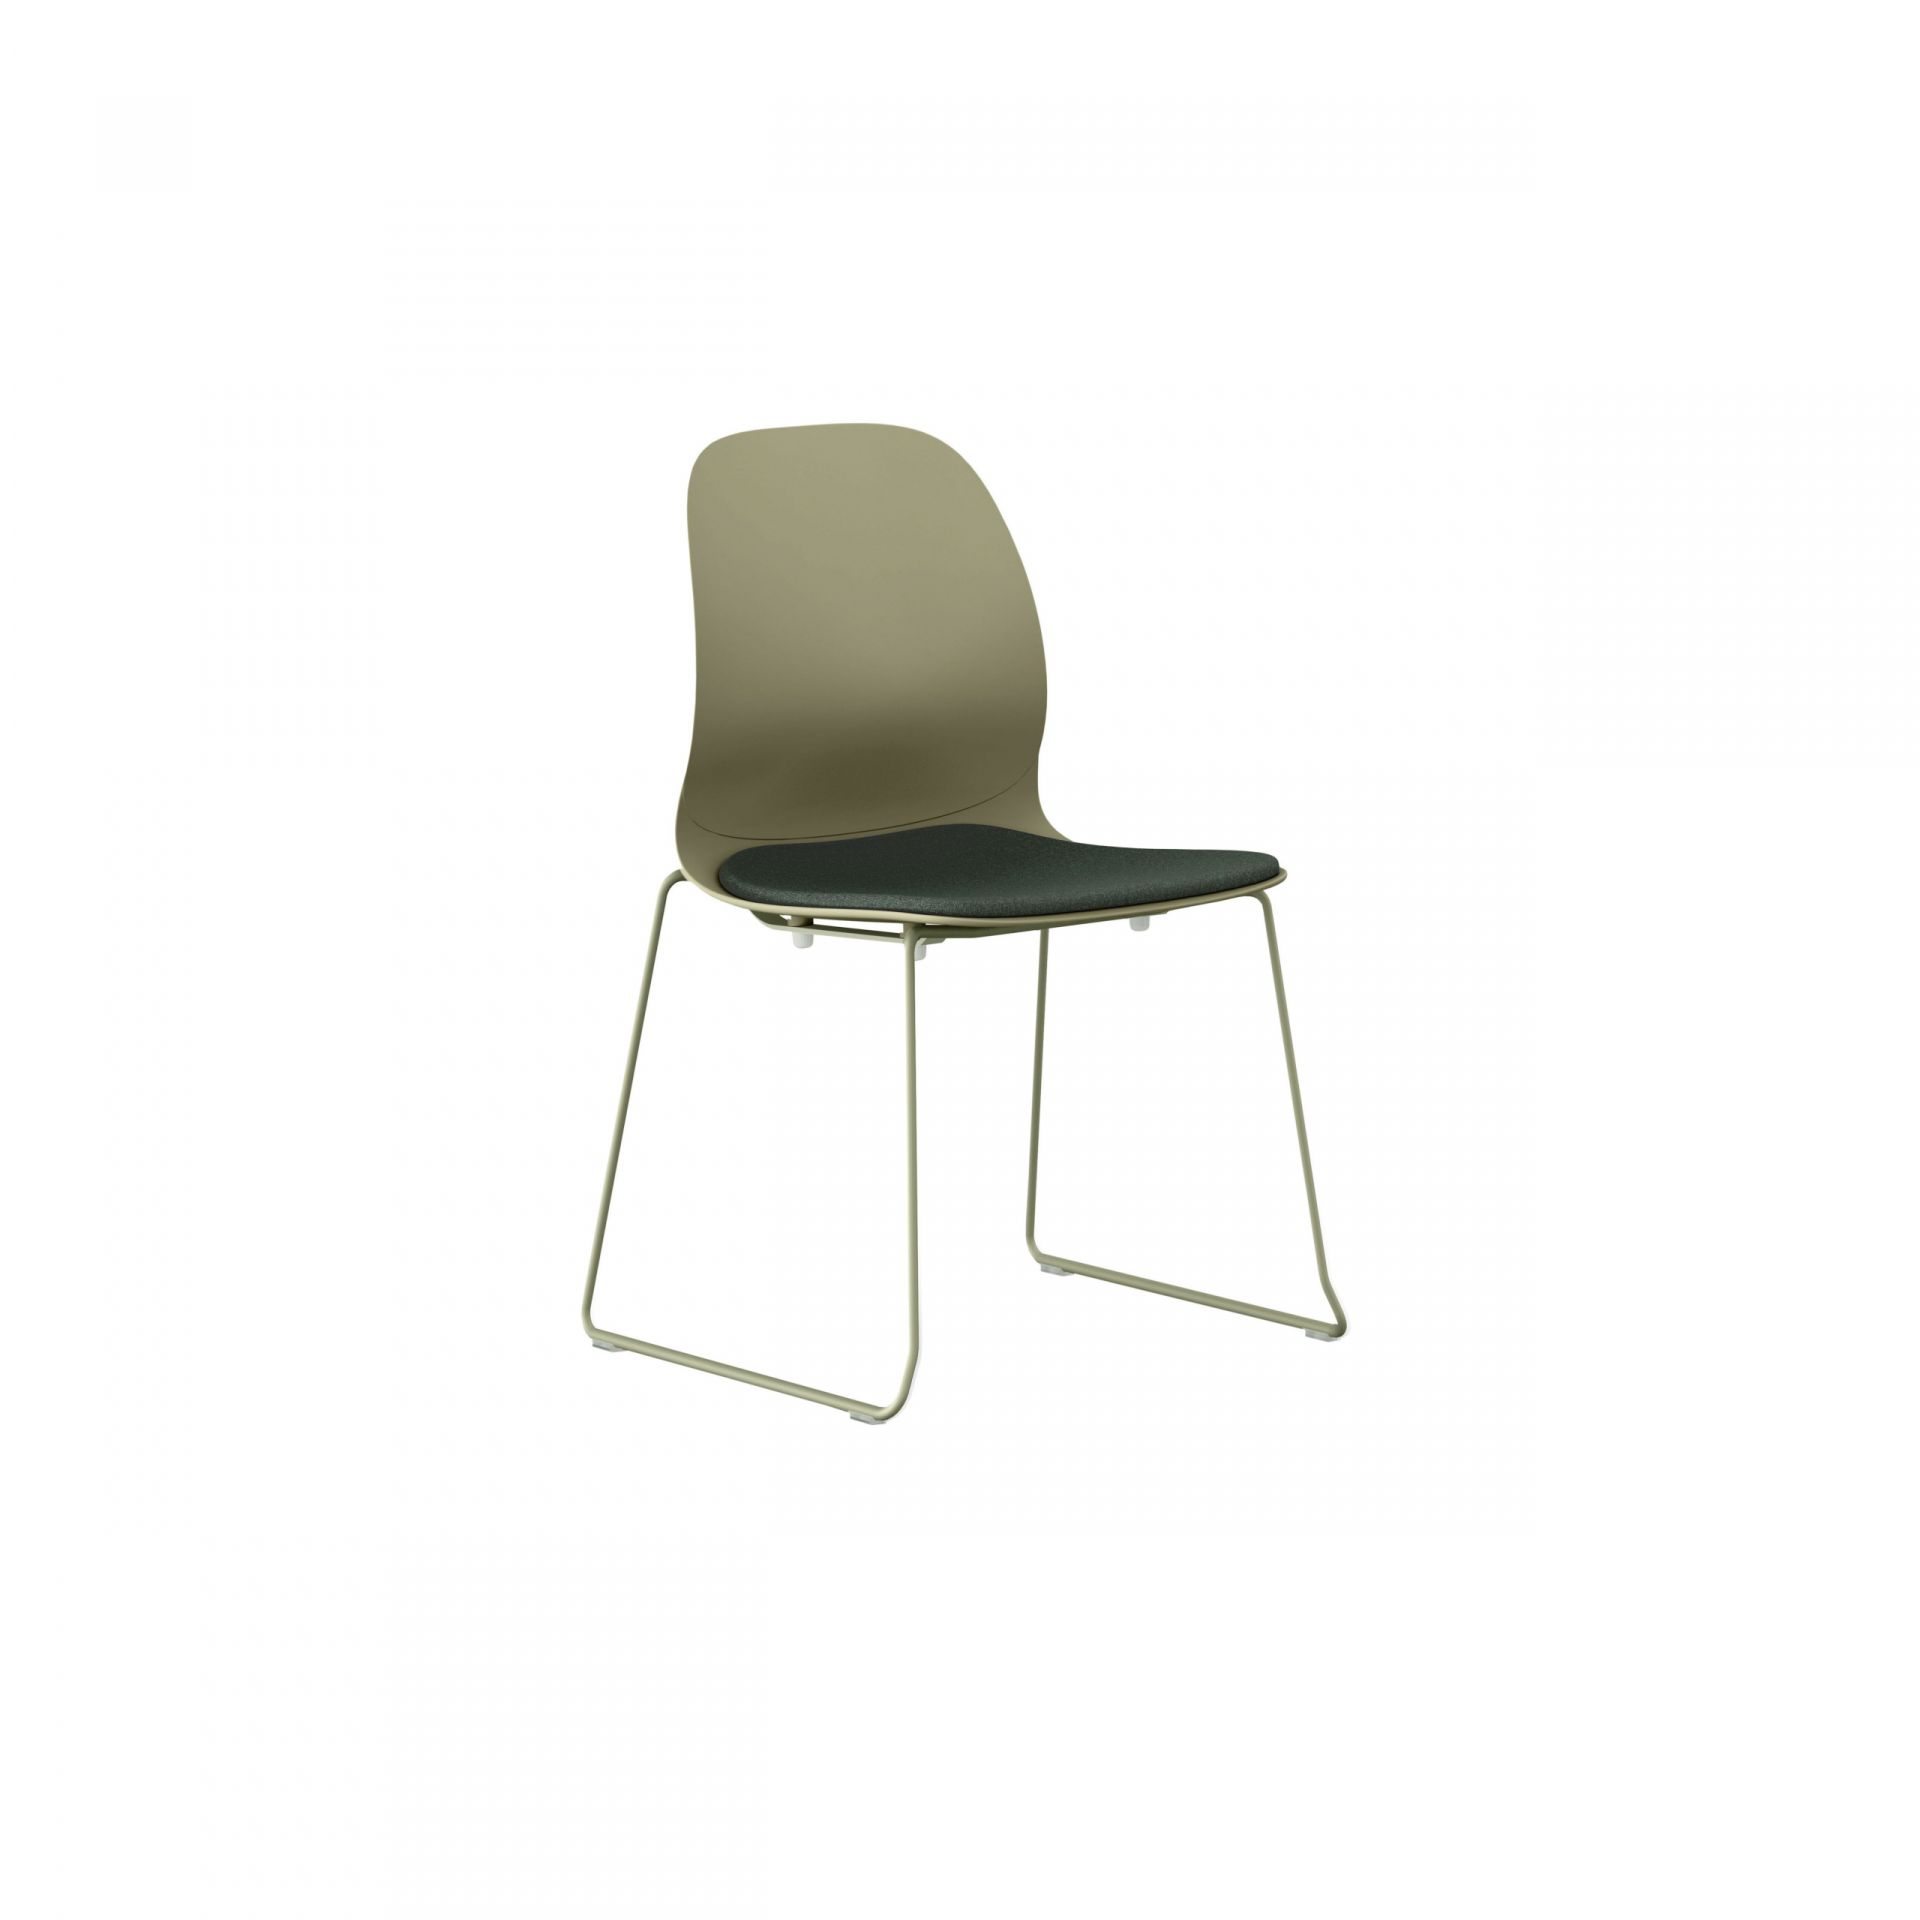 Archie Chair with sledge product image 1